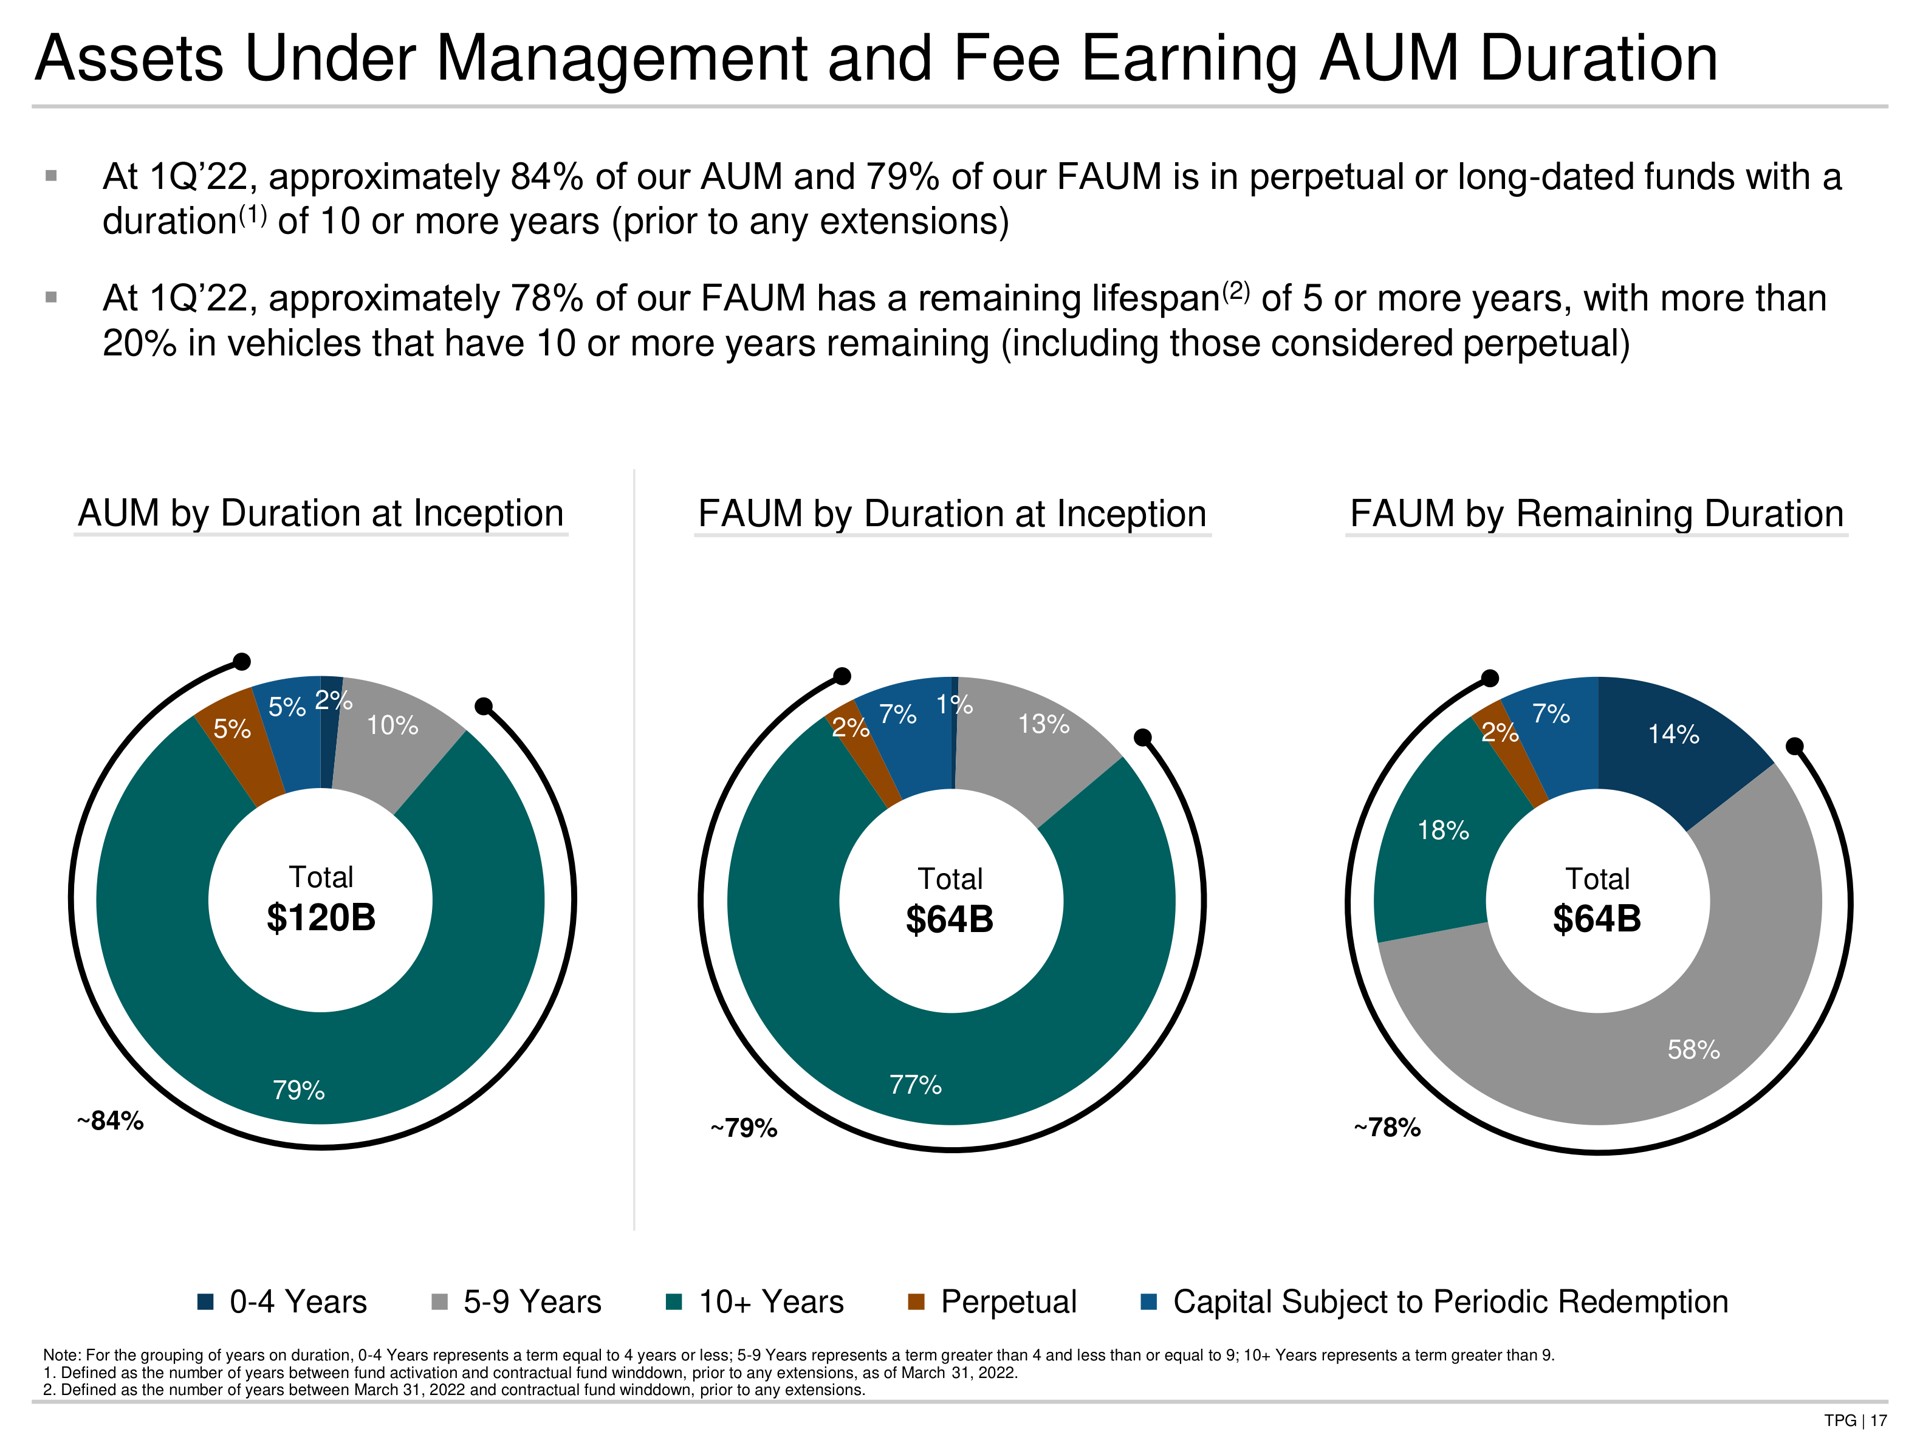 assets under management and fee earning aum duration at approximately of our aum and of our is in perpetual or long dated funds with a duration of or more years prior to any extensions at approximately of our has a remaining of or more years with more than in vehicles that have or more years remaining including those considered perpetual aum by duration at inception by duration at inception by remaining duration years years years perpetual capital subject to periodic redemption | TPG